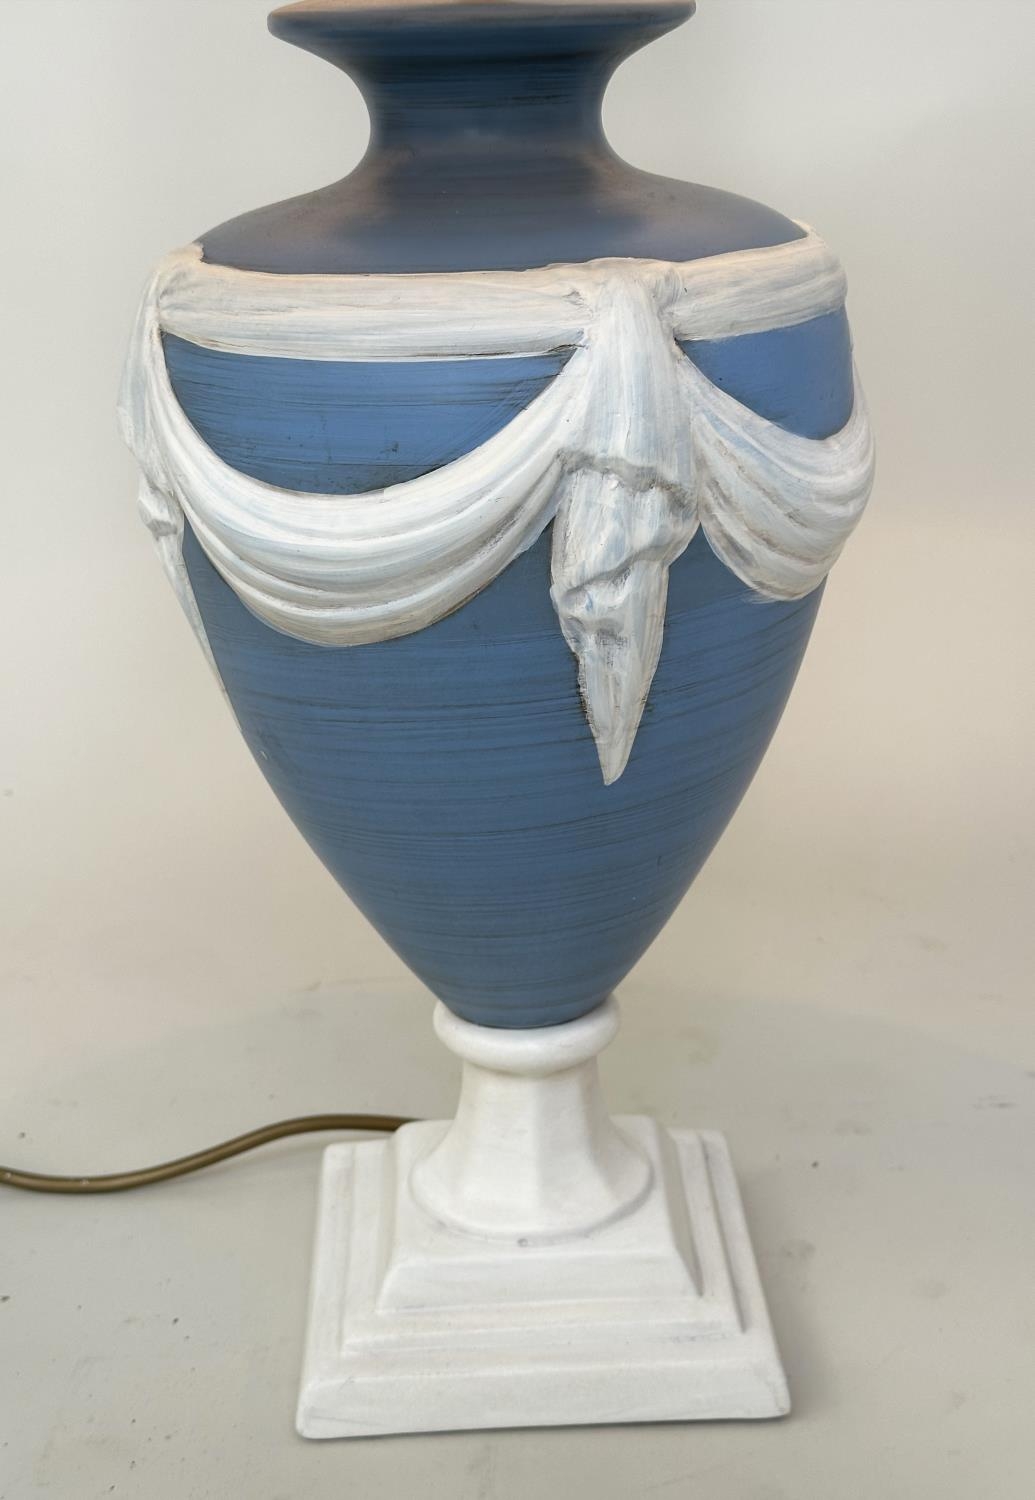 TABLE LAMPS, a pair, Wedgwood jasperware style of vase form with shades, 70cm H. - Image 6 of 12